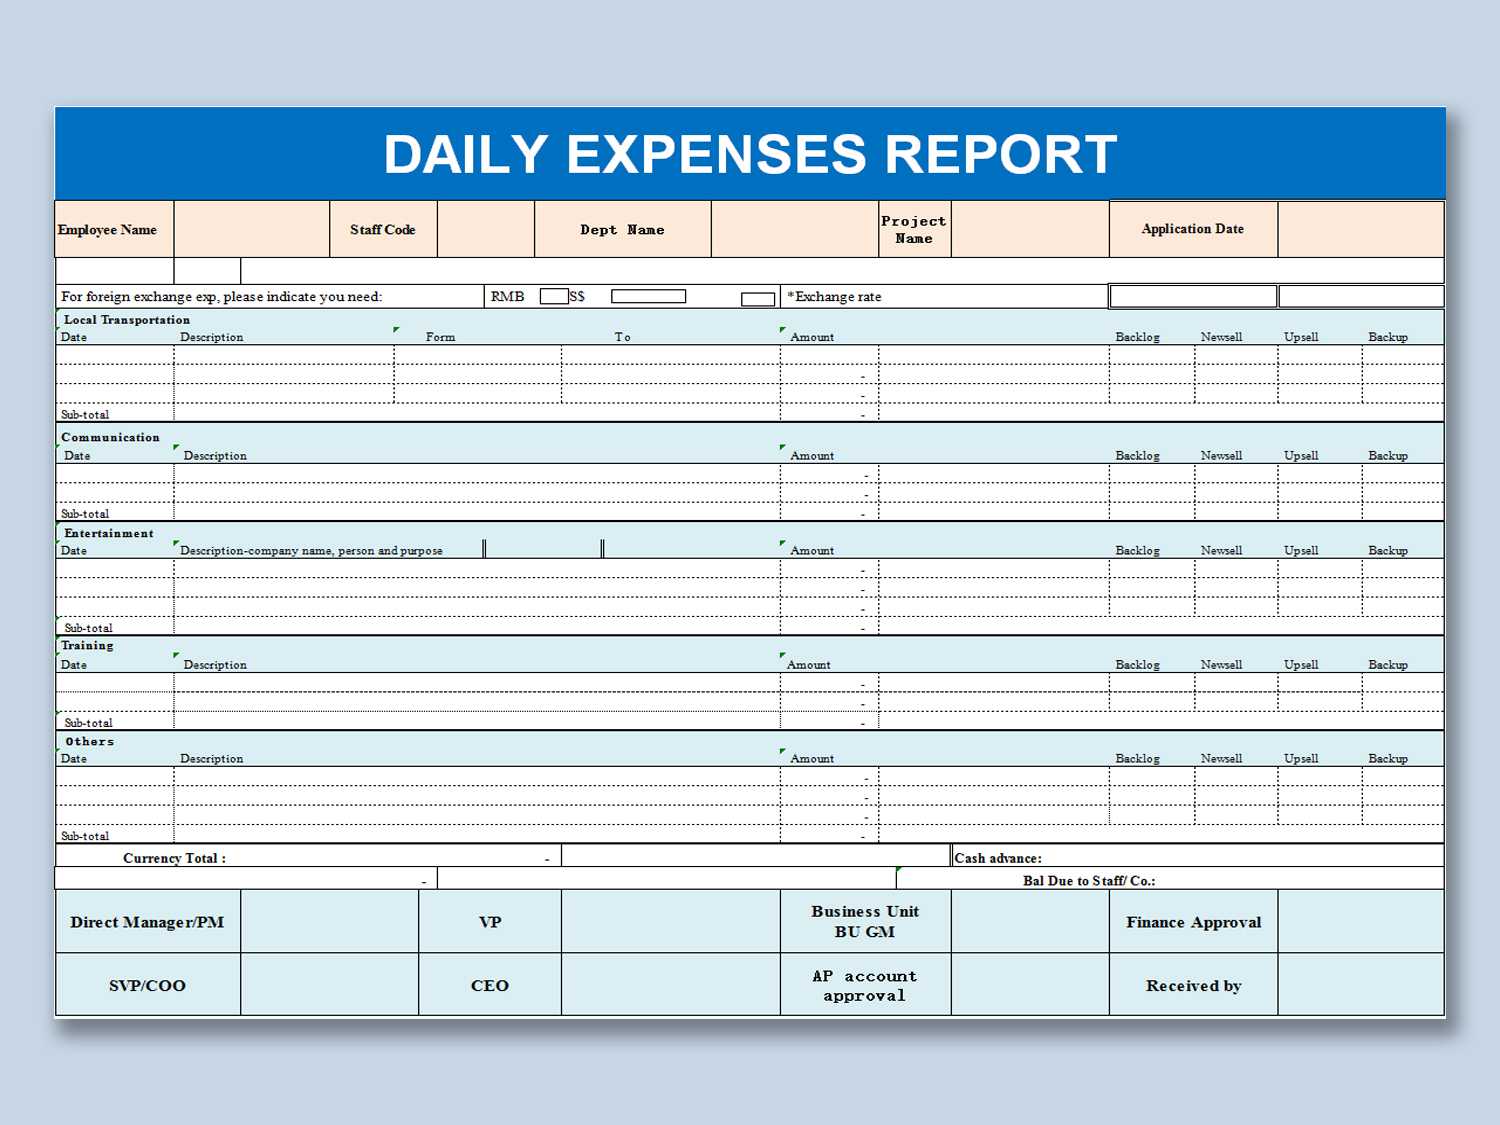 Wps Template – Free Download Writer, Presentation For Daily Expense Report Template